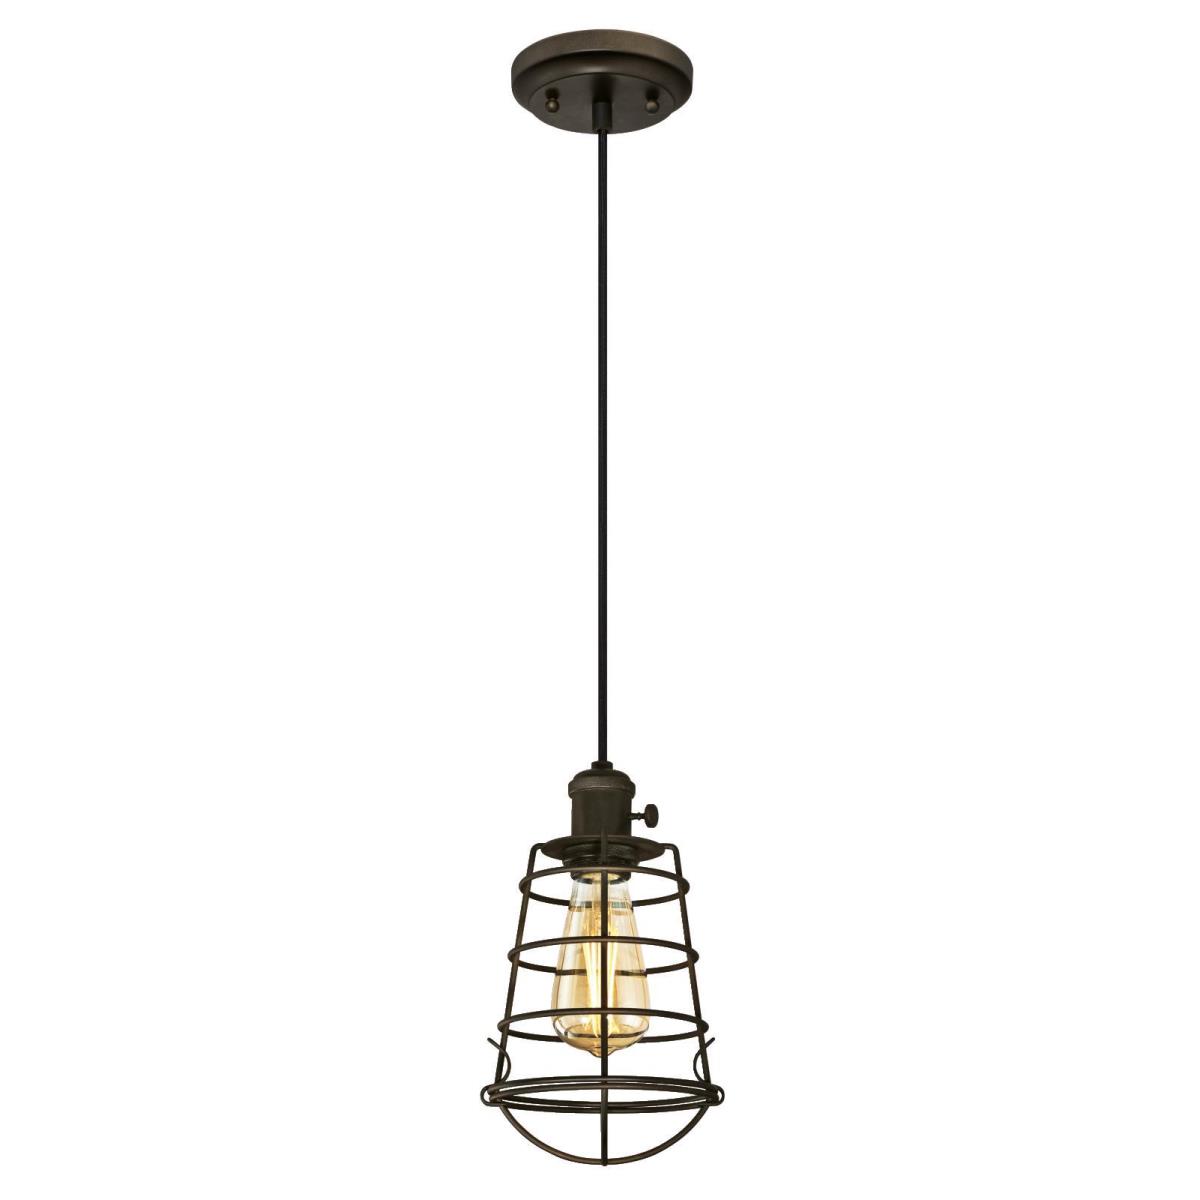 1 Light Mini Pendant with Turn Knob Oil Rubbed Bronze Finish with Cage Shade